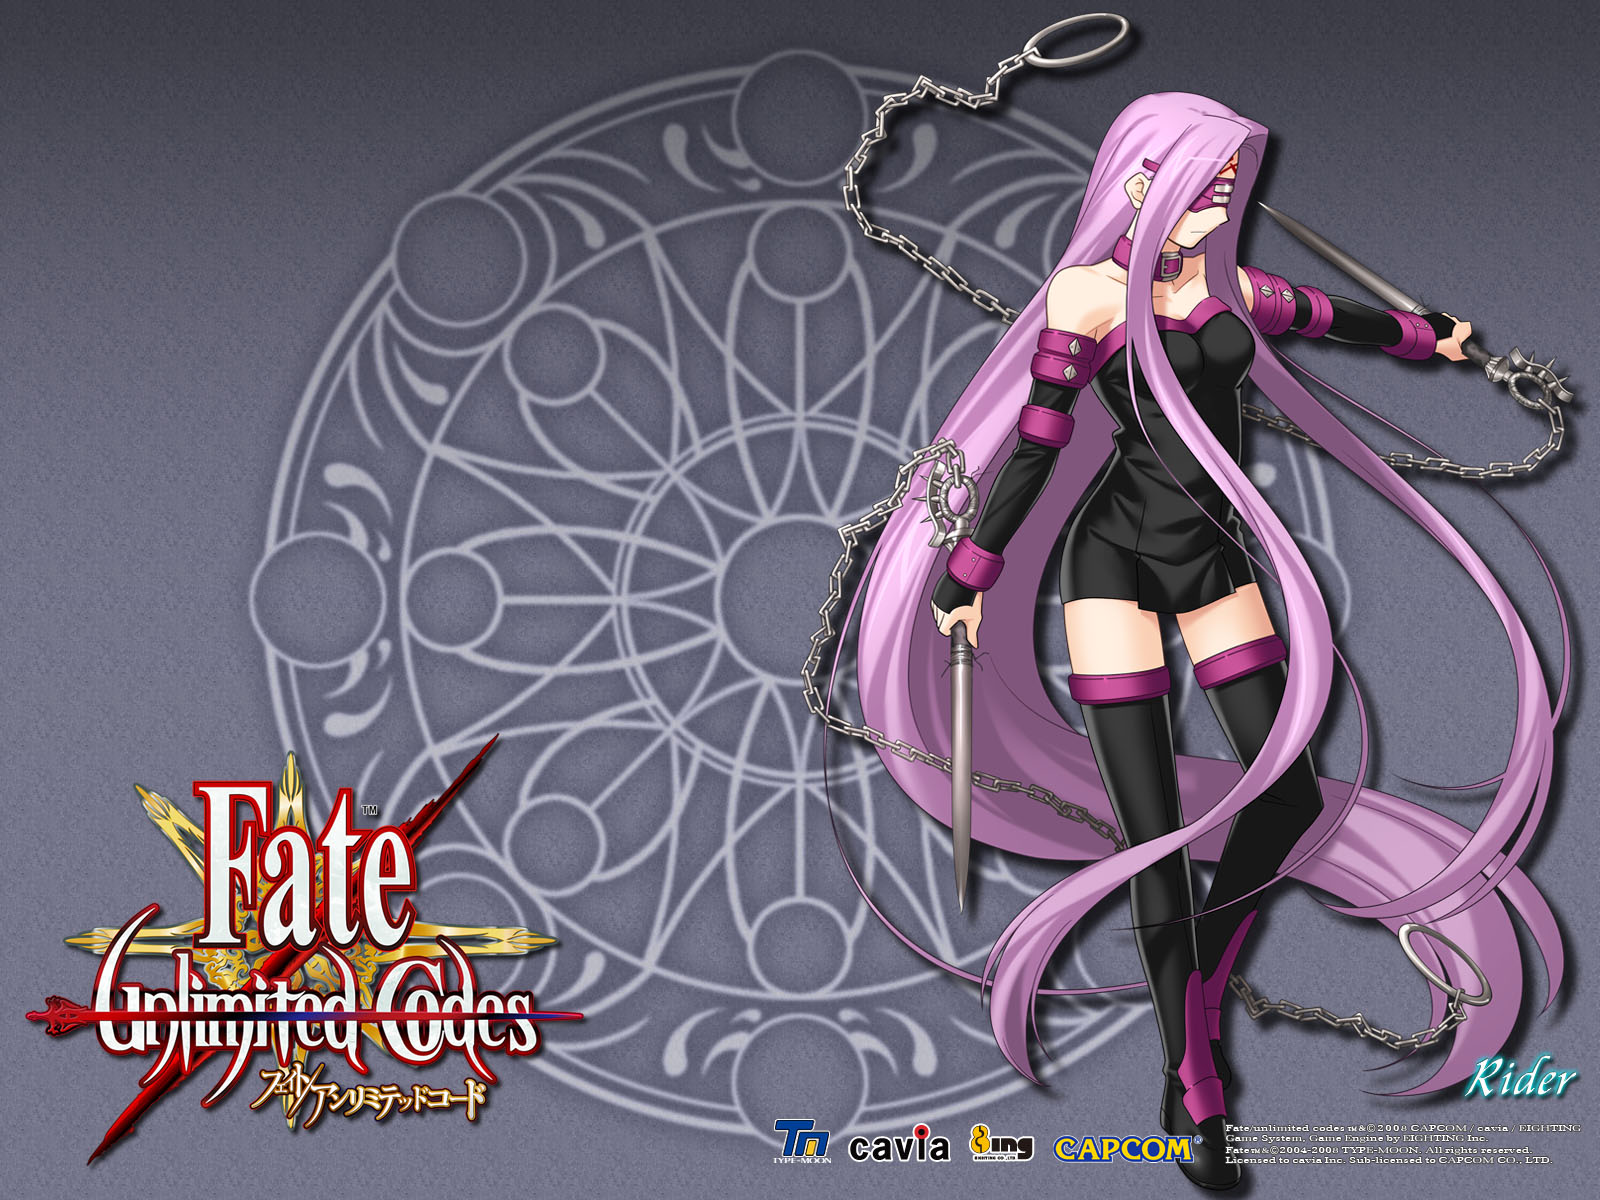 Rider character from Fate/stay night in an Anime-inspired desktop wallpaper.